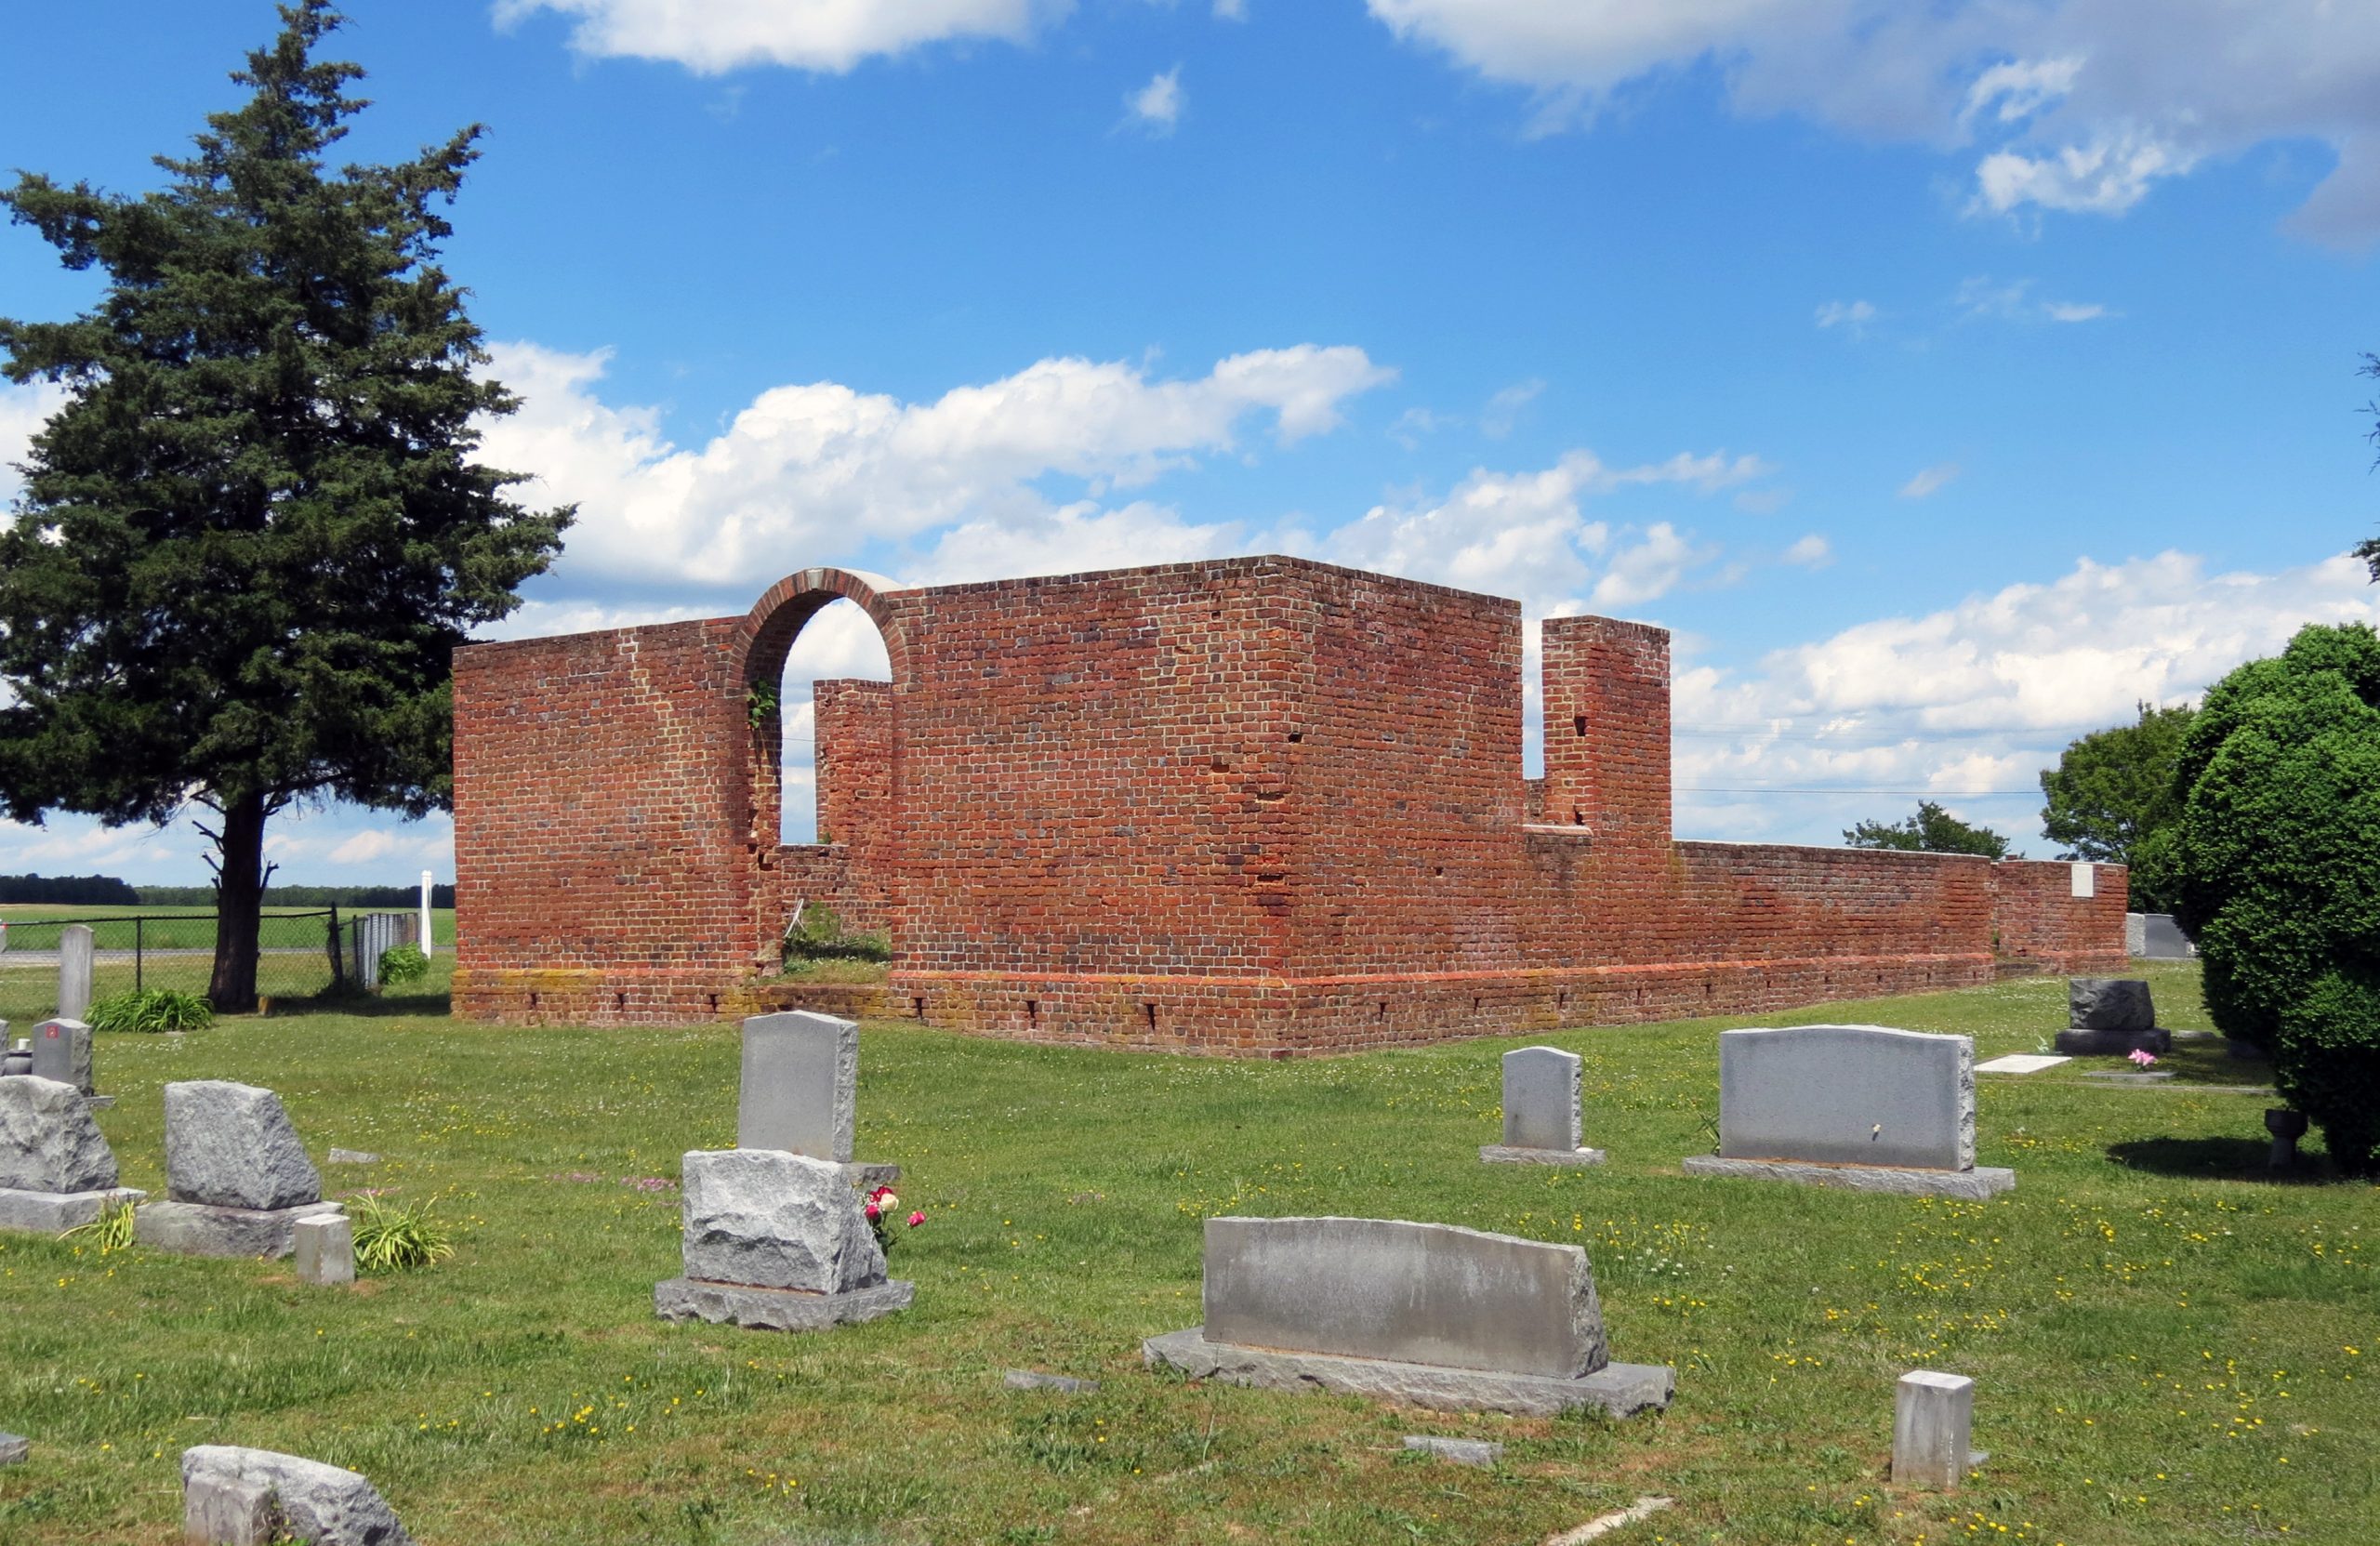 090-0034_Old_Brick_Church_2021_ruins-and_cemetery_setting_VLR_Online-scaled